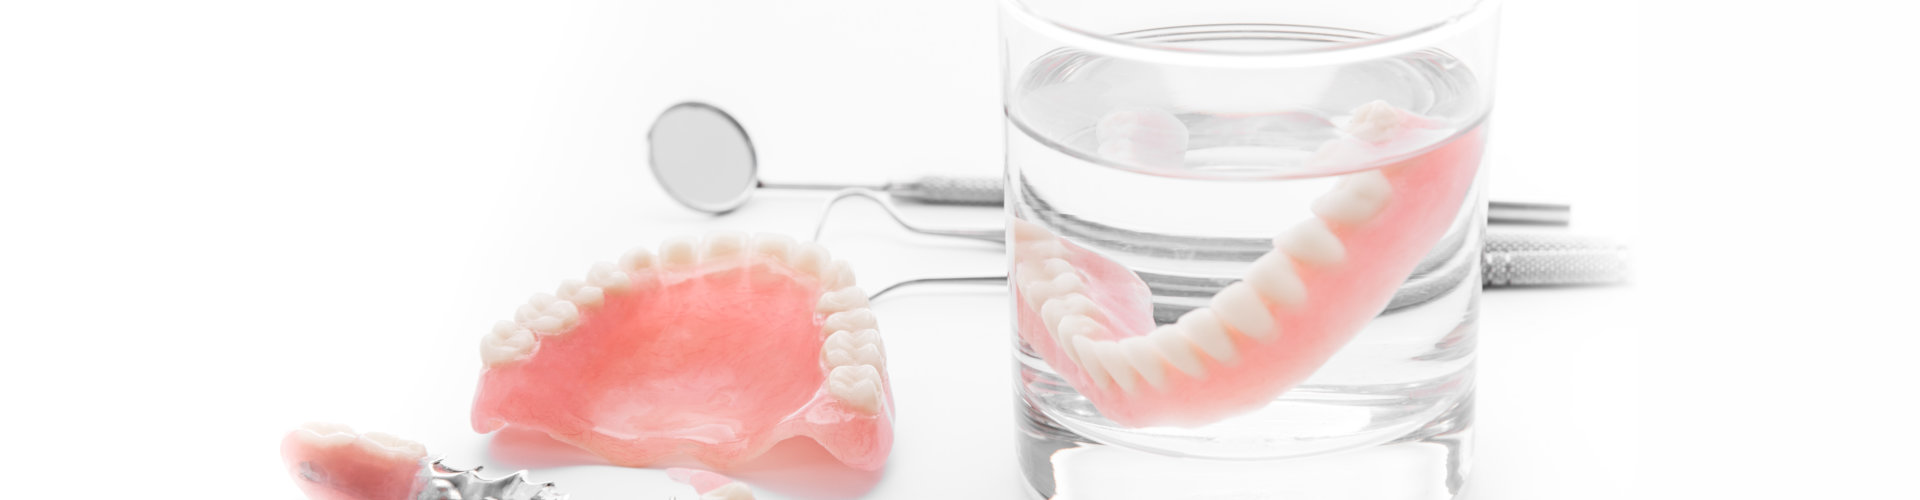 set of dentures with a white background